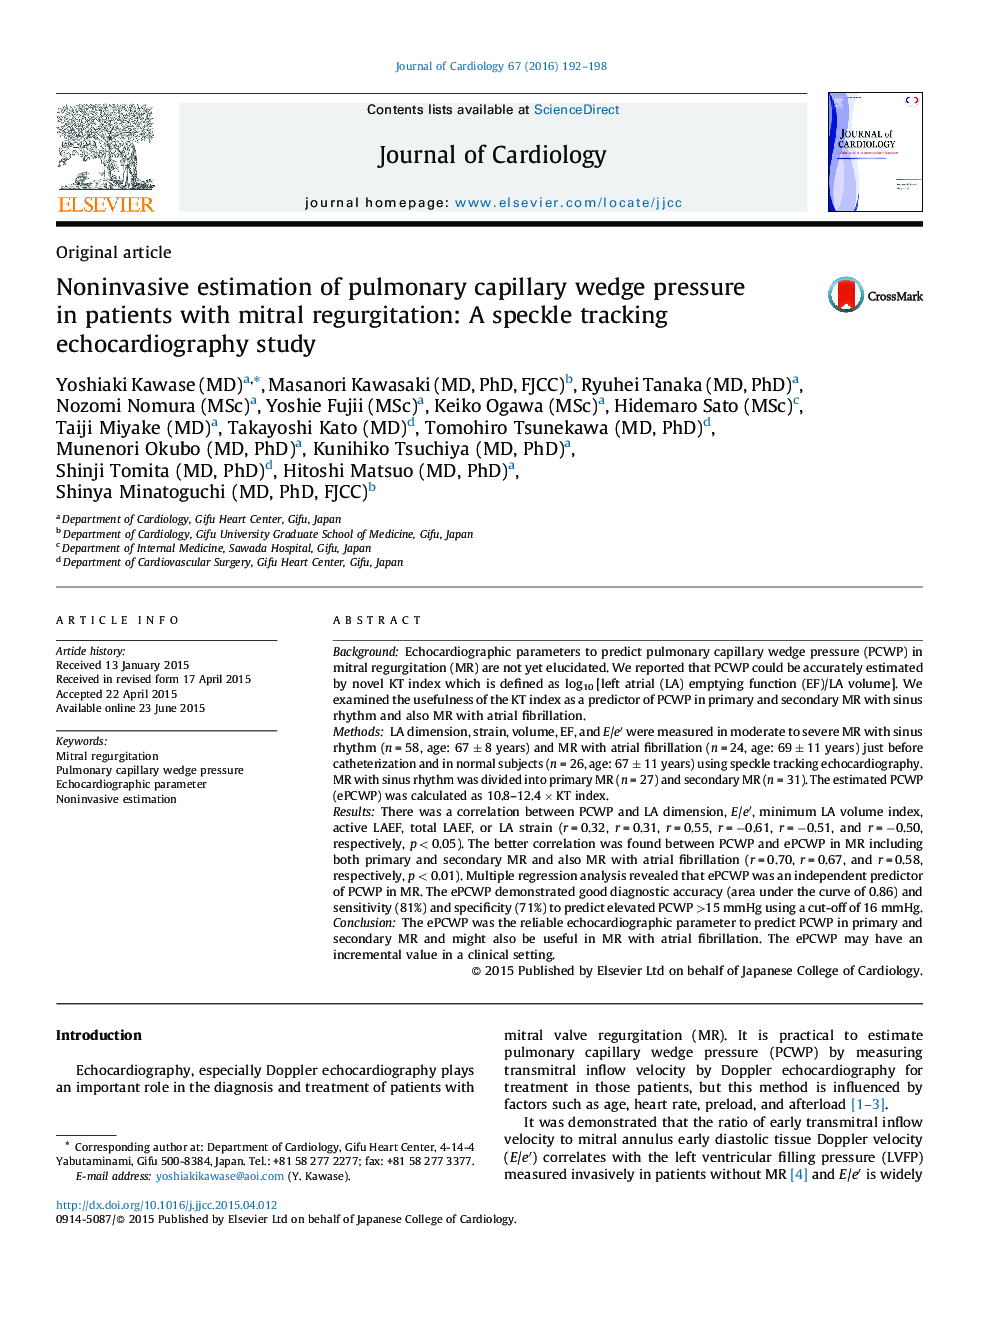 Noninvasive estimation of pulmonary capillary wedge pressure in patients with mitral regurgitation: A speckle tracking echocardiography study